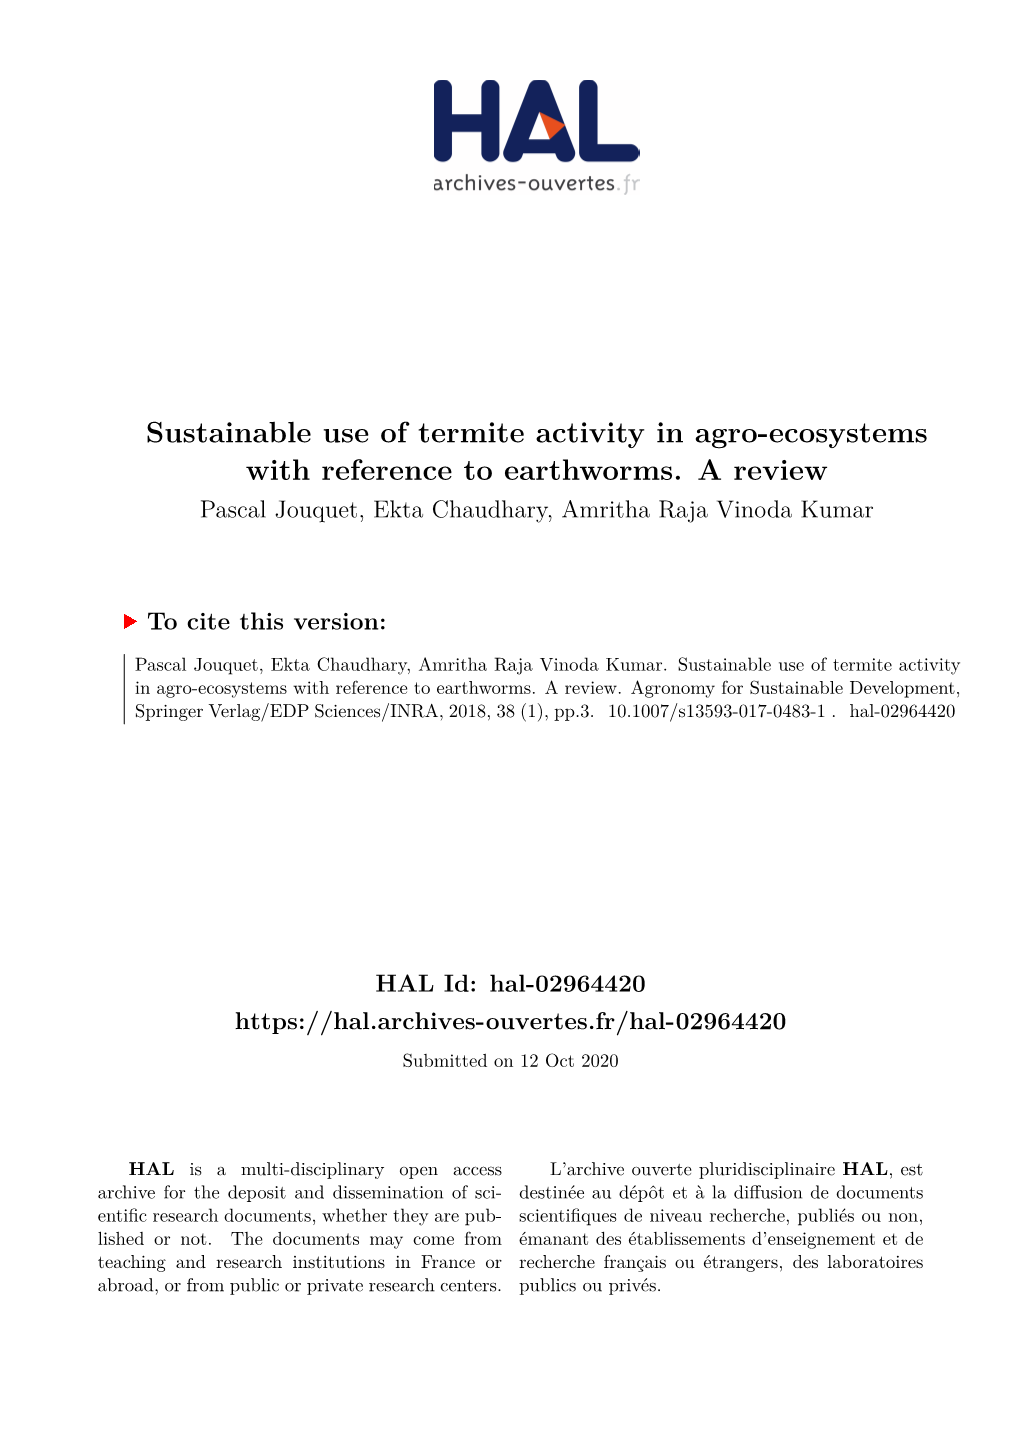 Sustainable Use of Termite Activity in Agro-Ecosystems with Reference to Earthworms